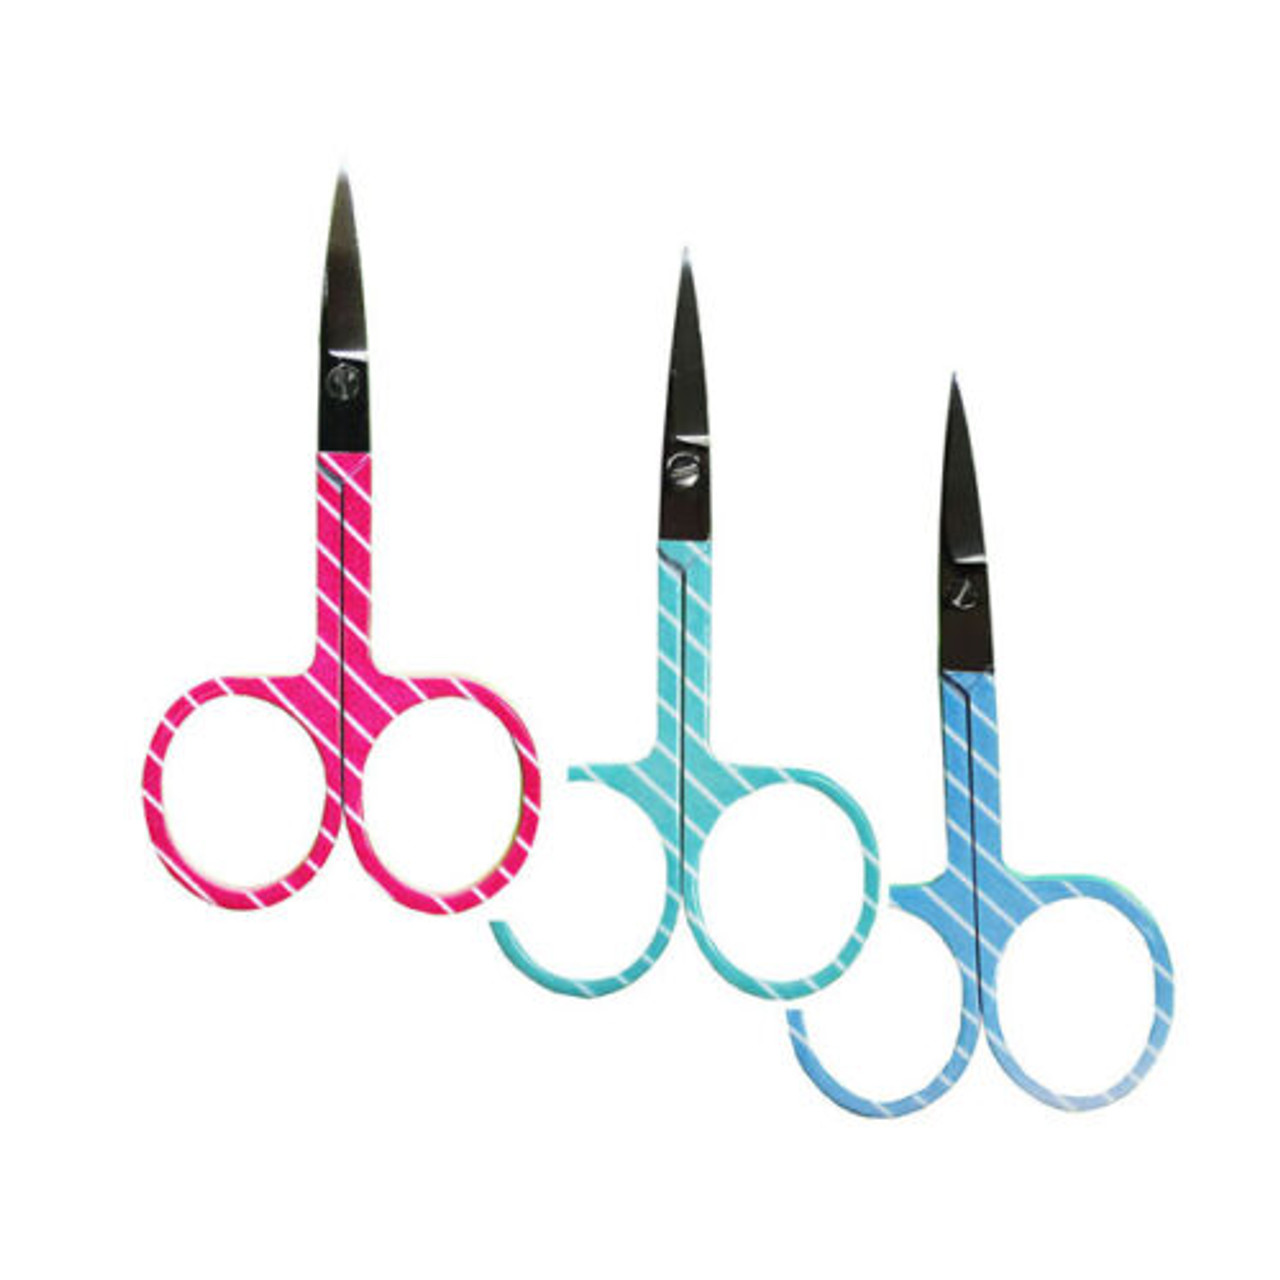 Embroidery Scissors, Pinstripes on Colored Handles